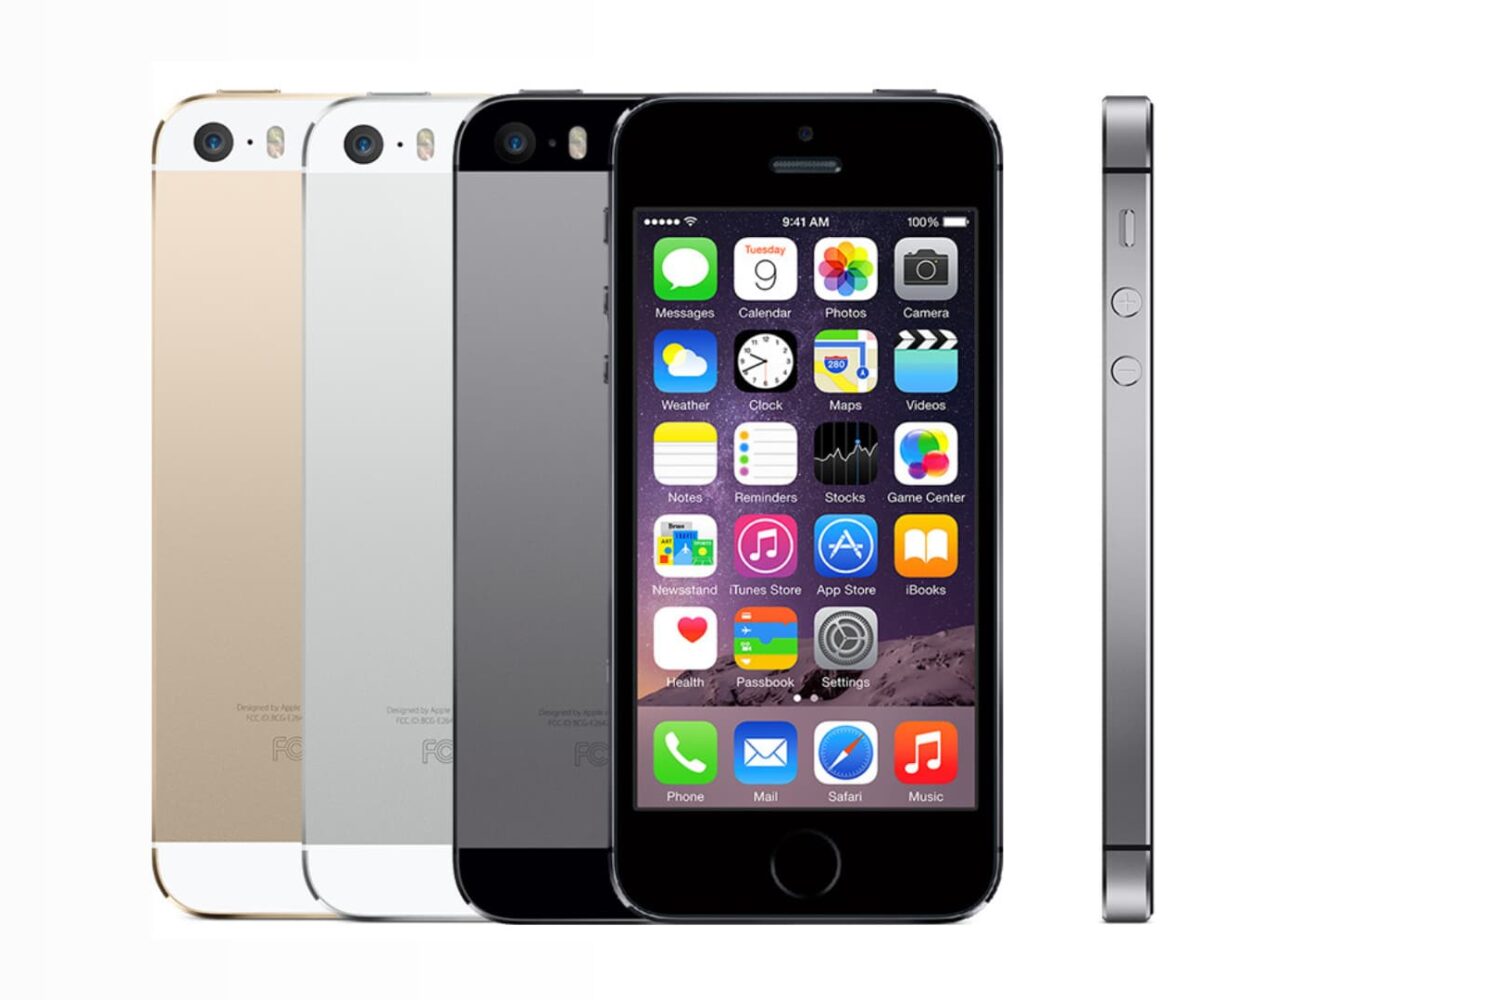 iPhone 5S colors running iOS 7